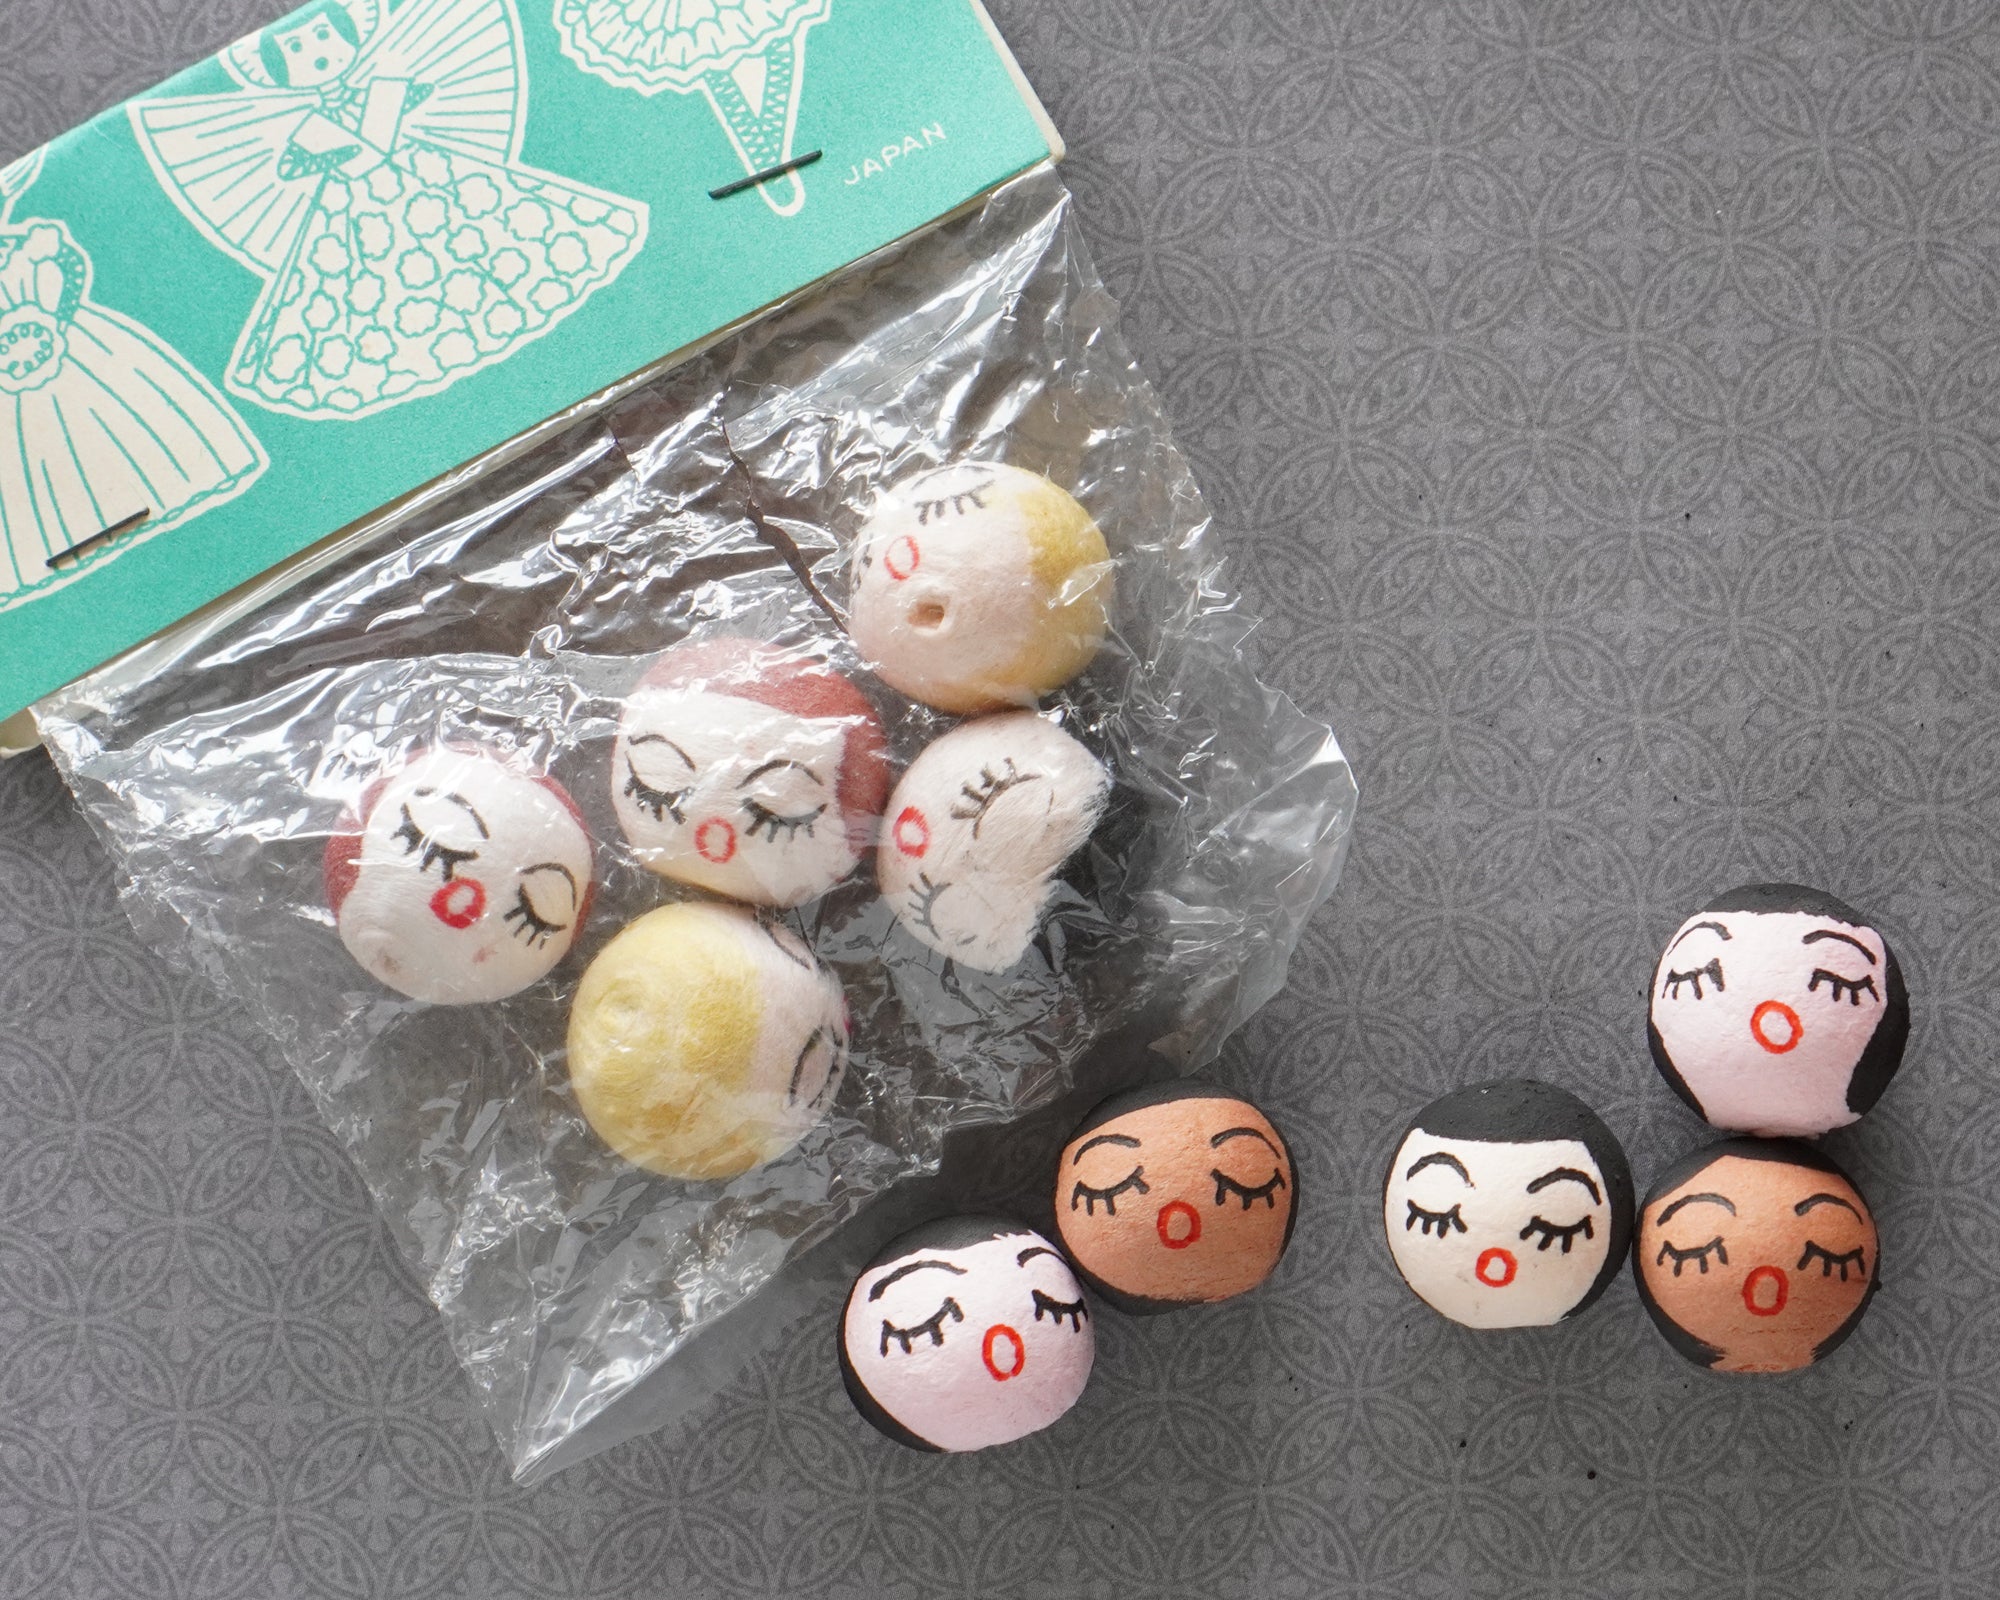 Tips for Drawing Vintage Faces on Spun Cotton Doll Heads